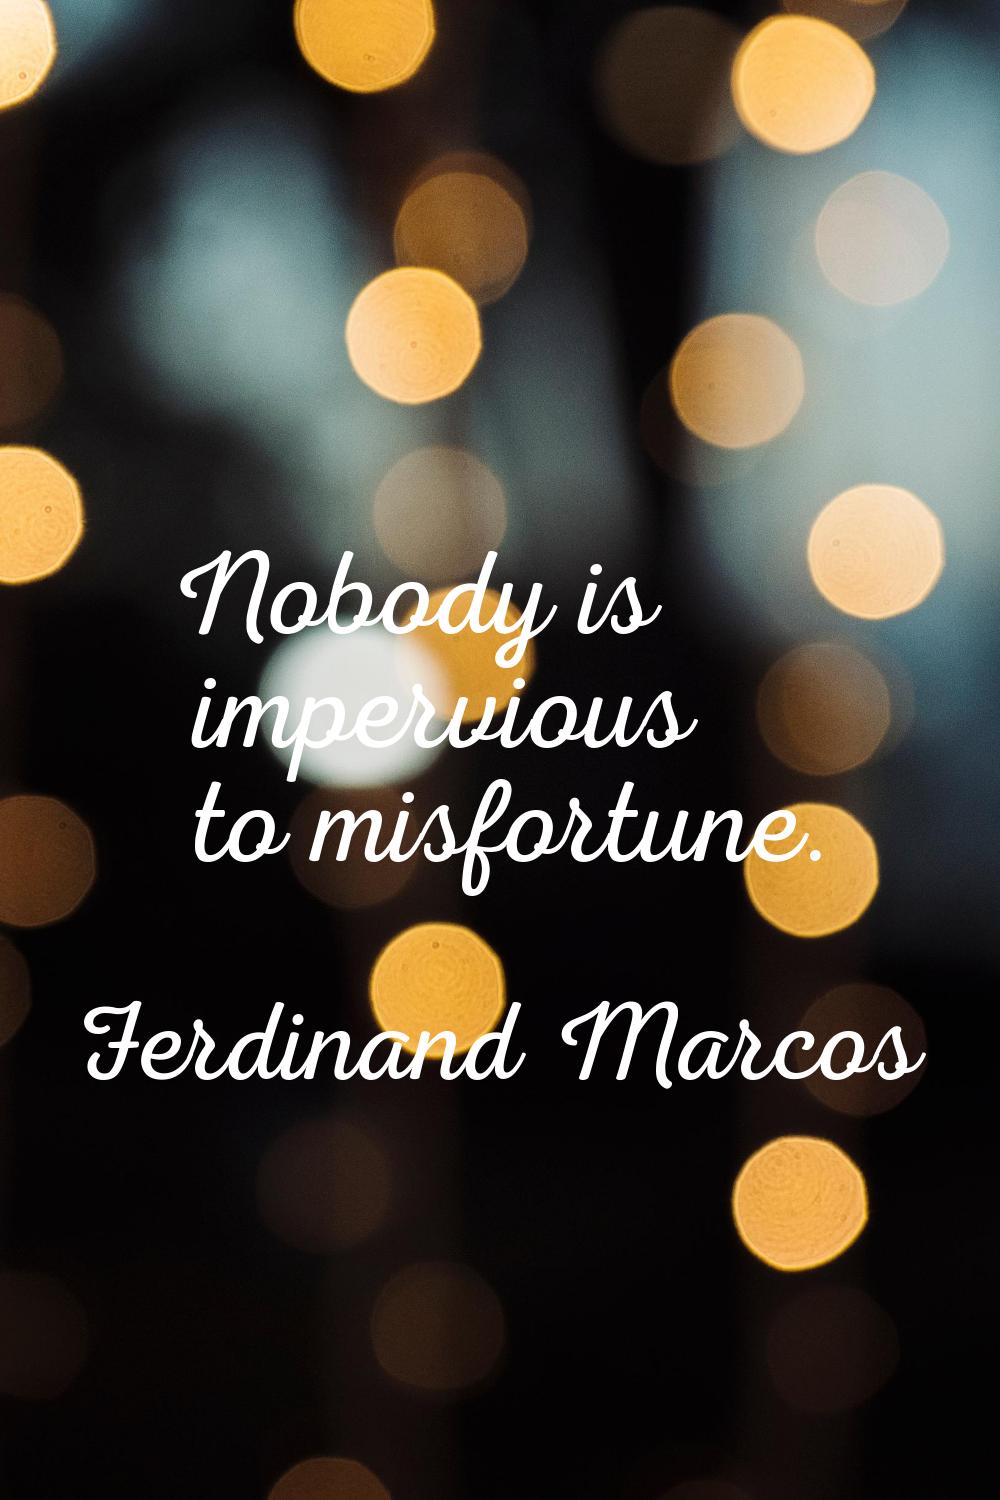 Nobody is impervious to misfortune.